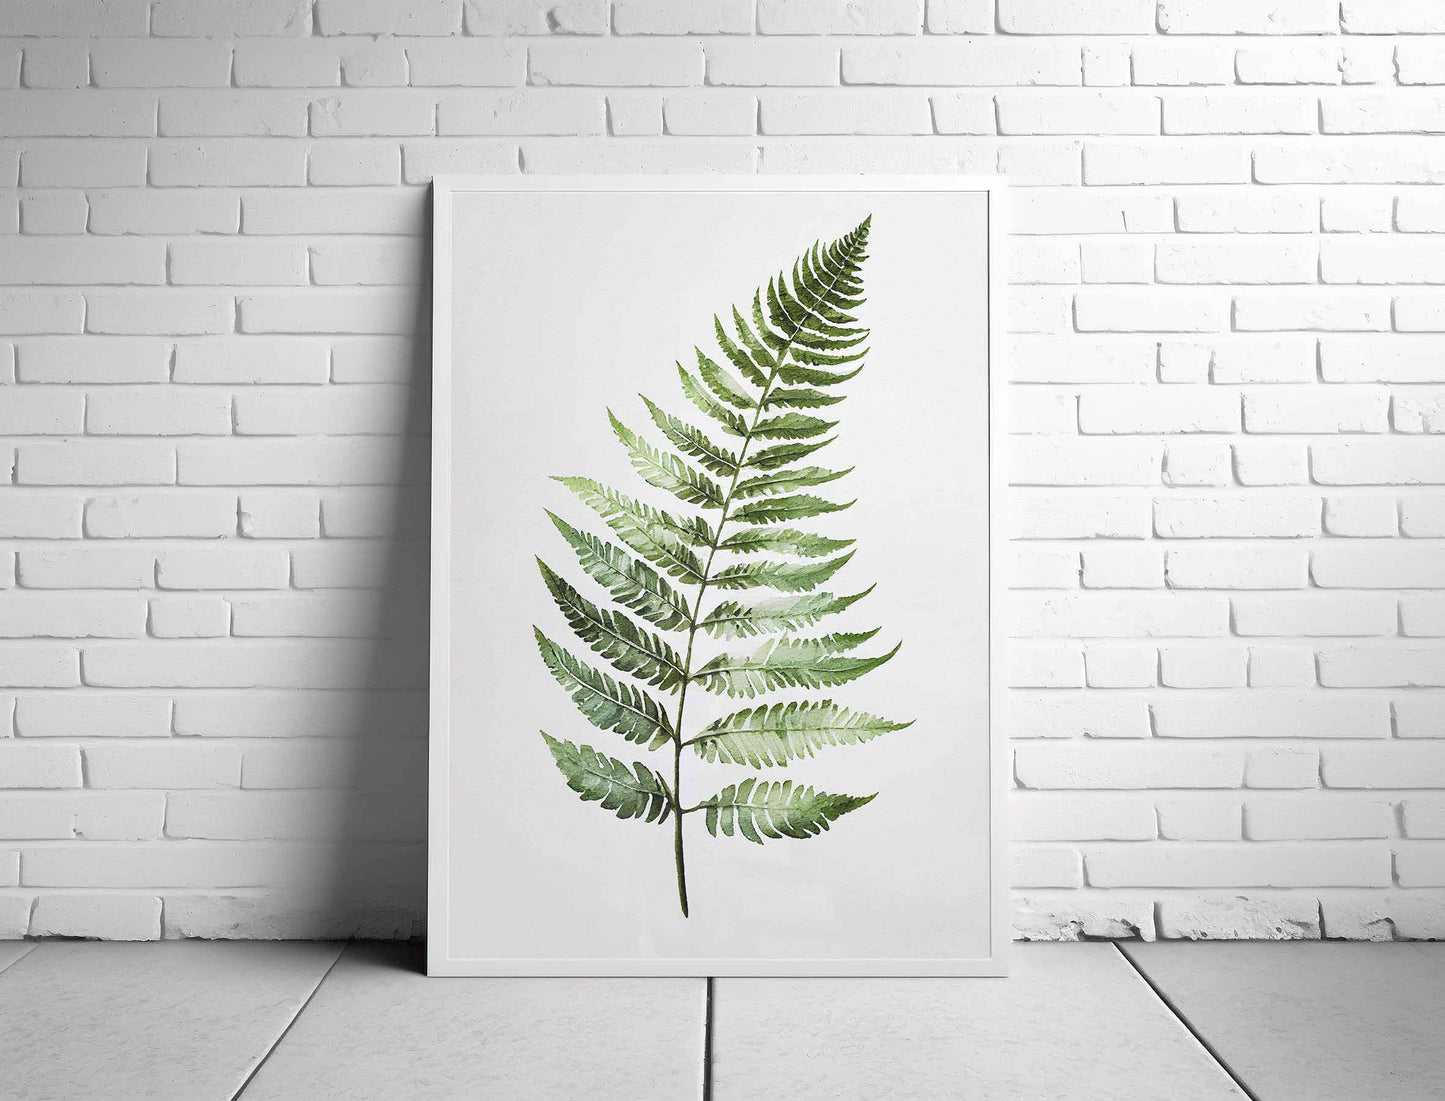 Framed Image of Tropical Fern Watercolour Wall Art Poster Print